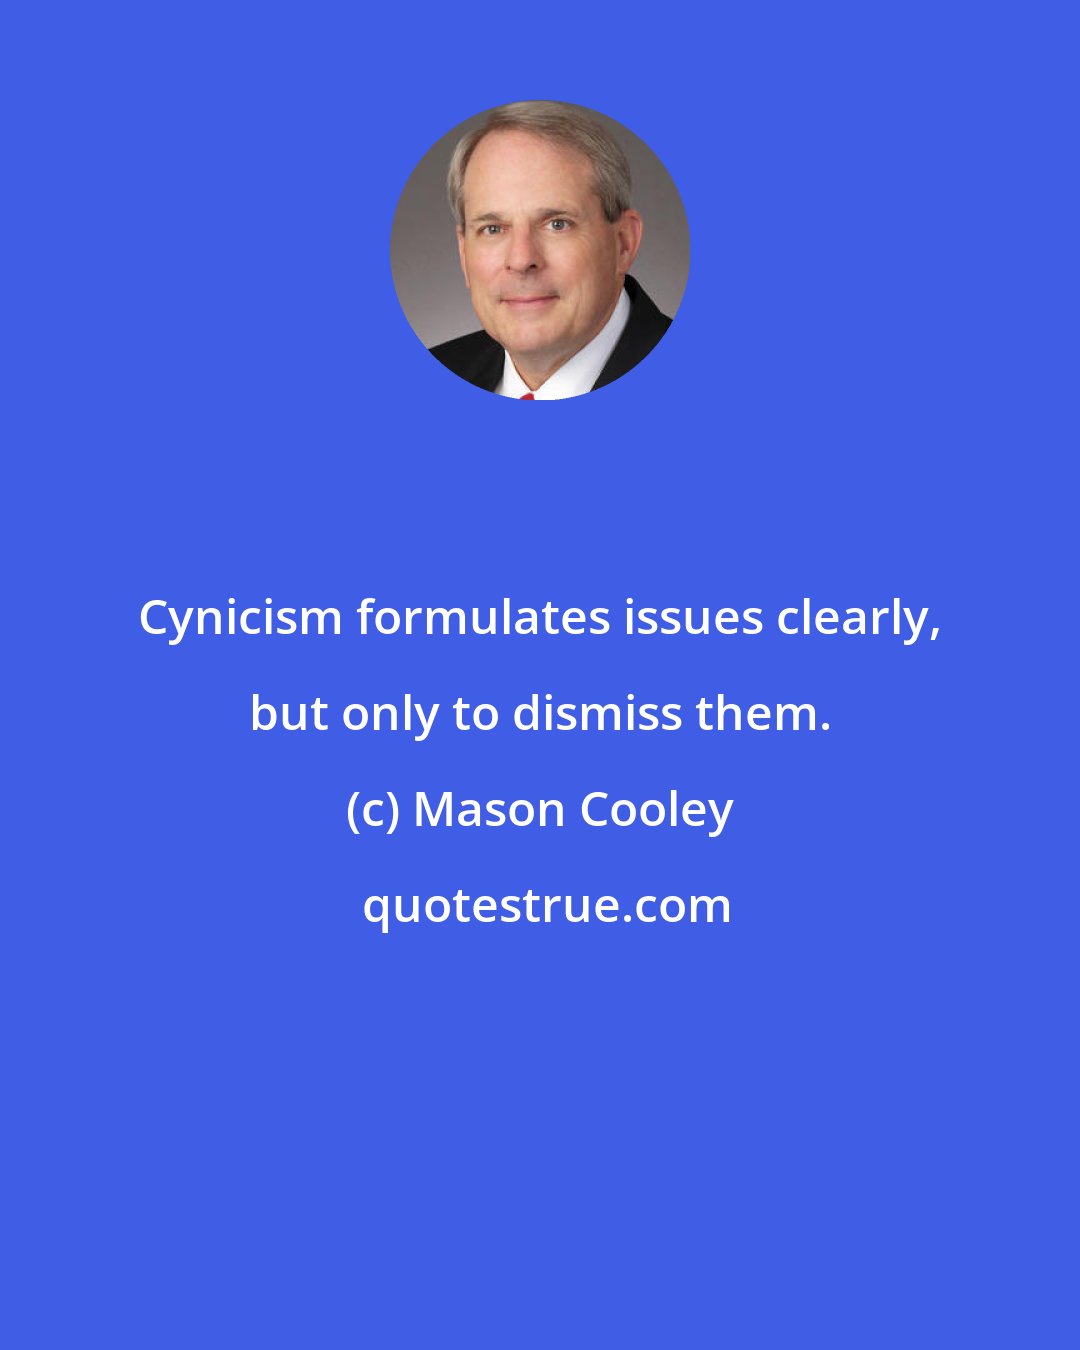 Mason Cooley: Cynicism formulates issues clearly, but only to dismiss them.